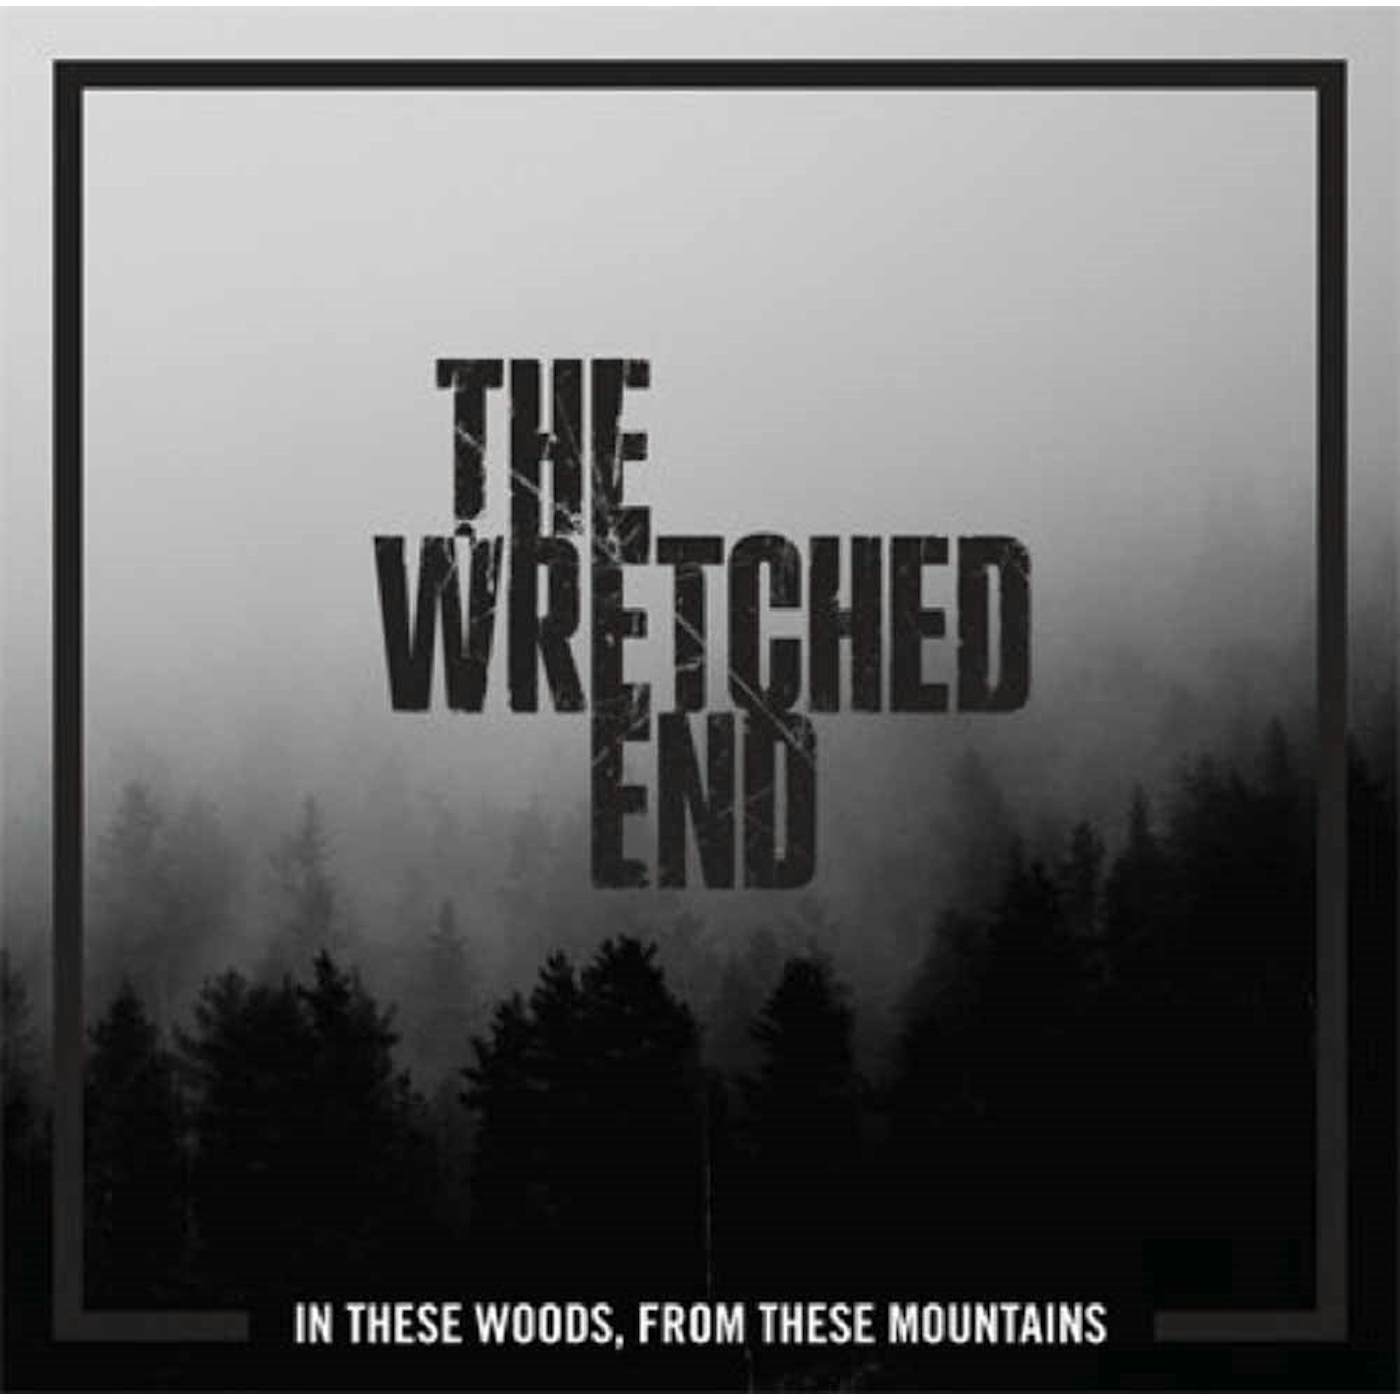 The Wretched End LP - In These Woods, From These Mountains (Coloured Vinyl)